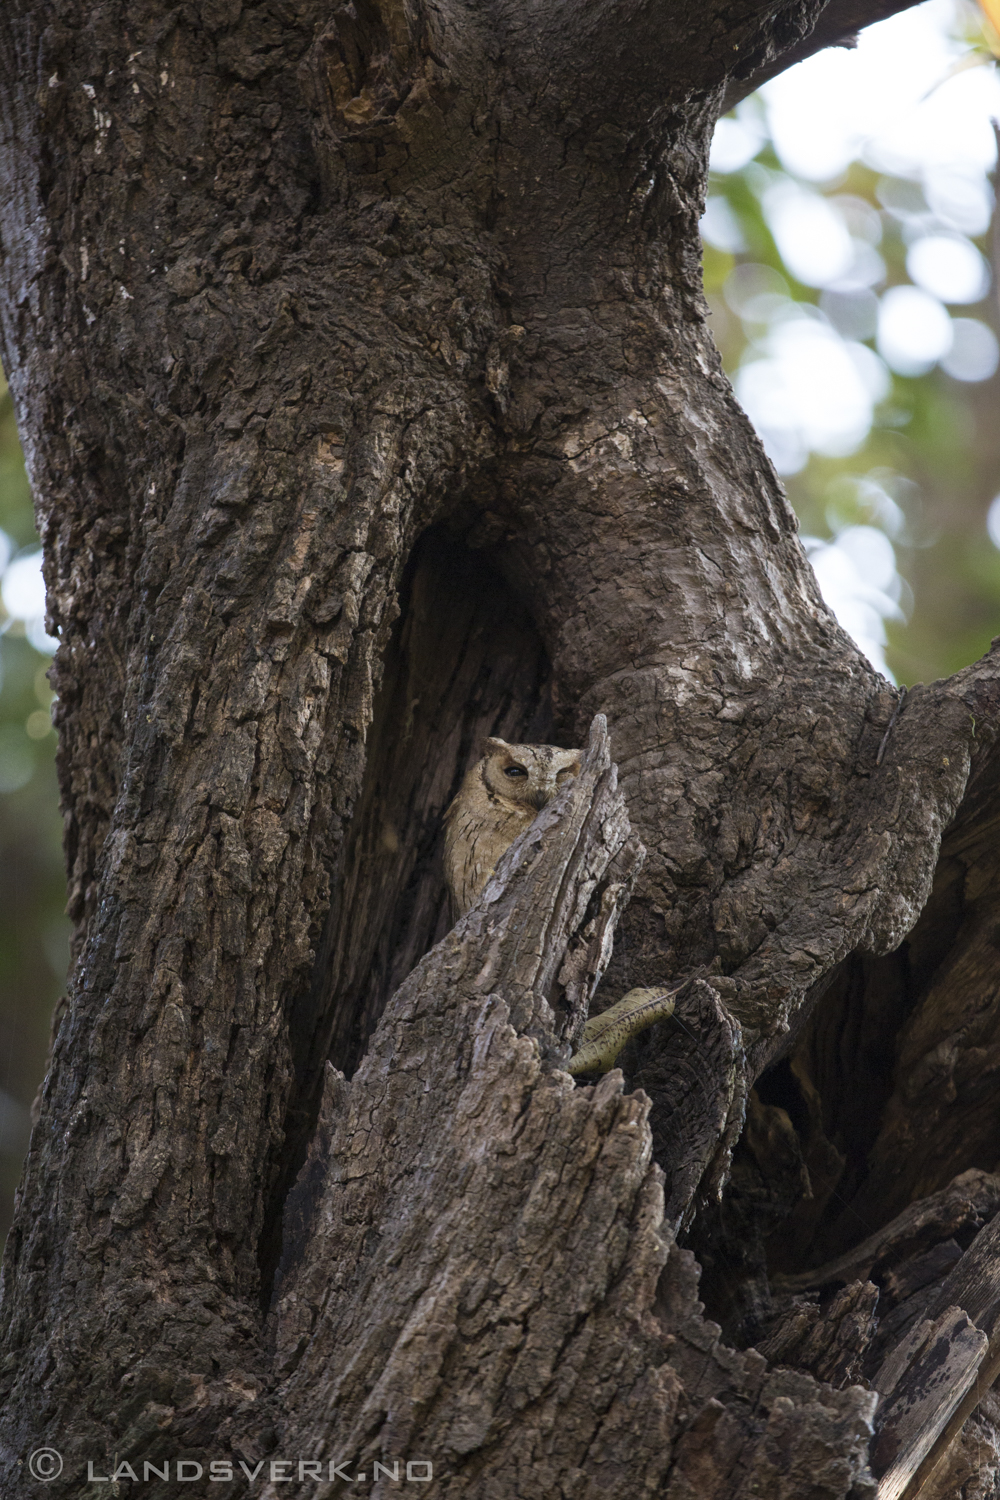 Wild owl. Ranthambore National Park, India. 

(Canon EOS 5D Mark III / Canon EF 70-200mm f/2.8 L IS II USM / Canon 2x EF Extender III)